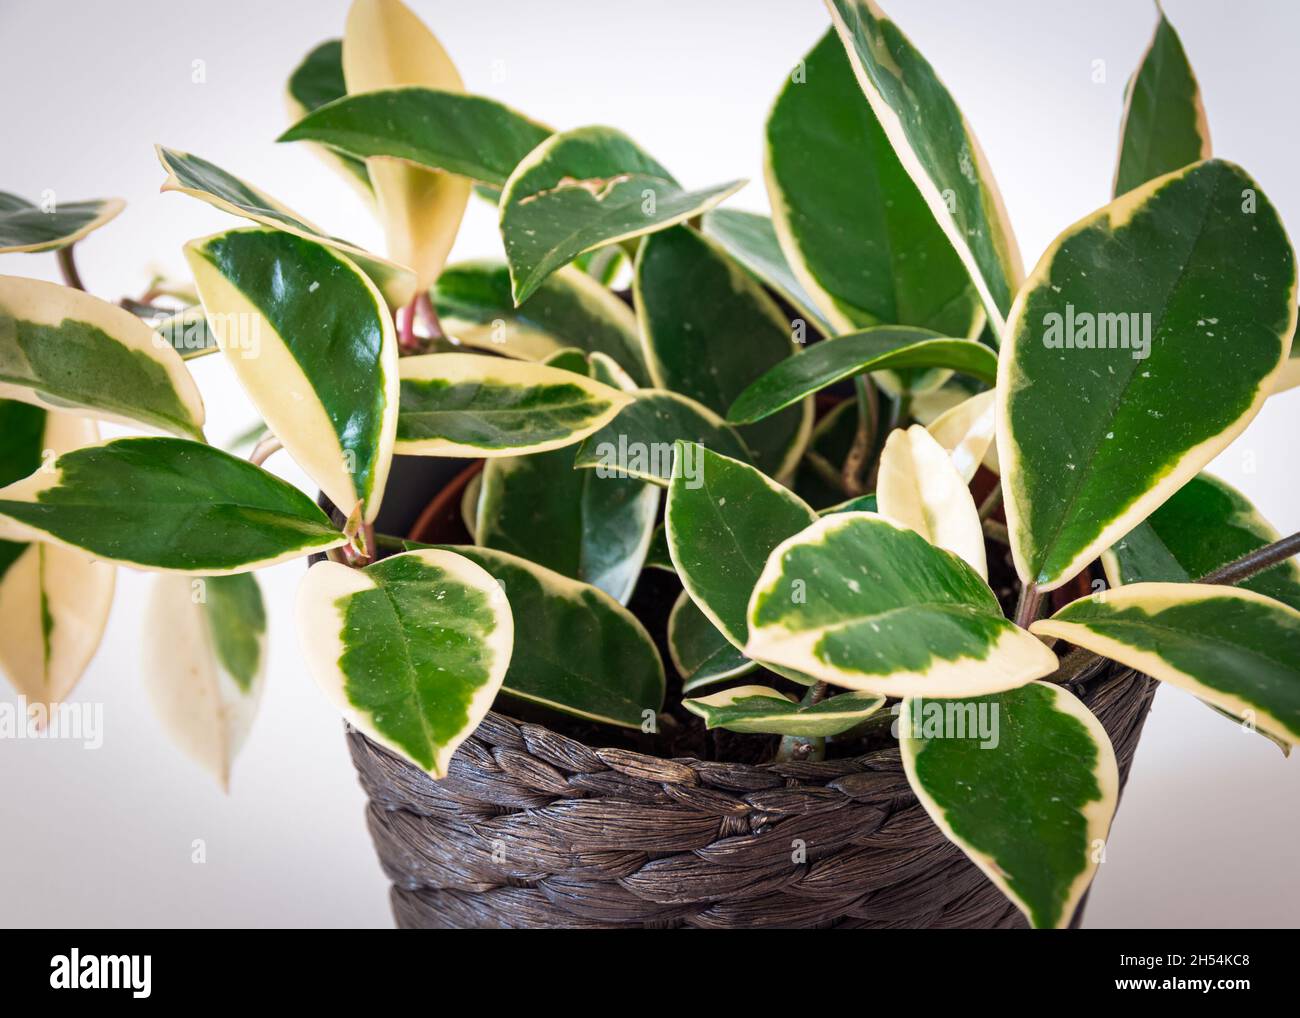 Variegated foliage of hoya carnosa variegata 'Krimson Queen' on a white background.  Exotic trendy houseplant detail with prominent variegation. Stock Photo